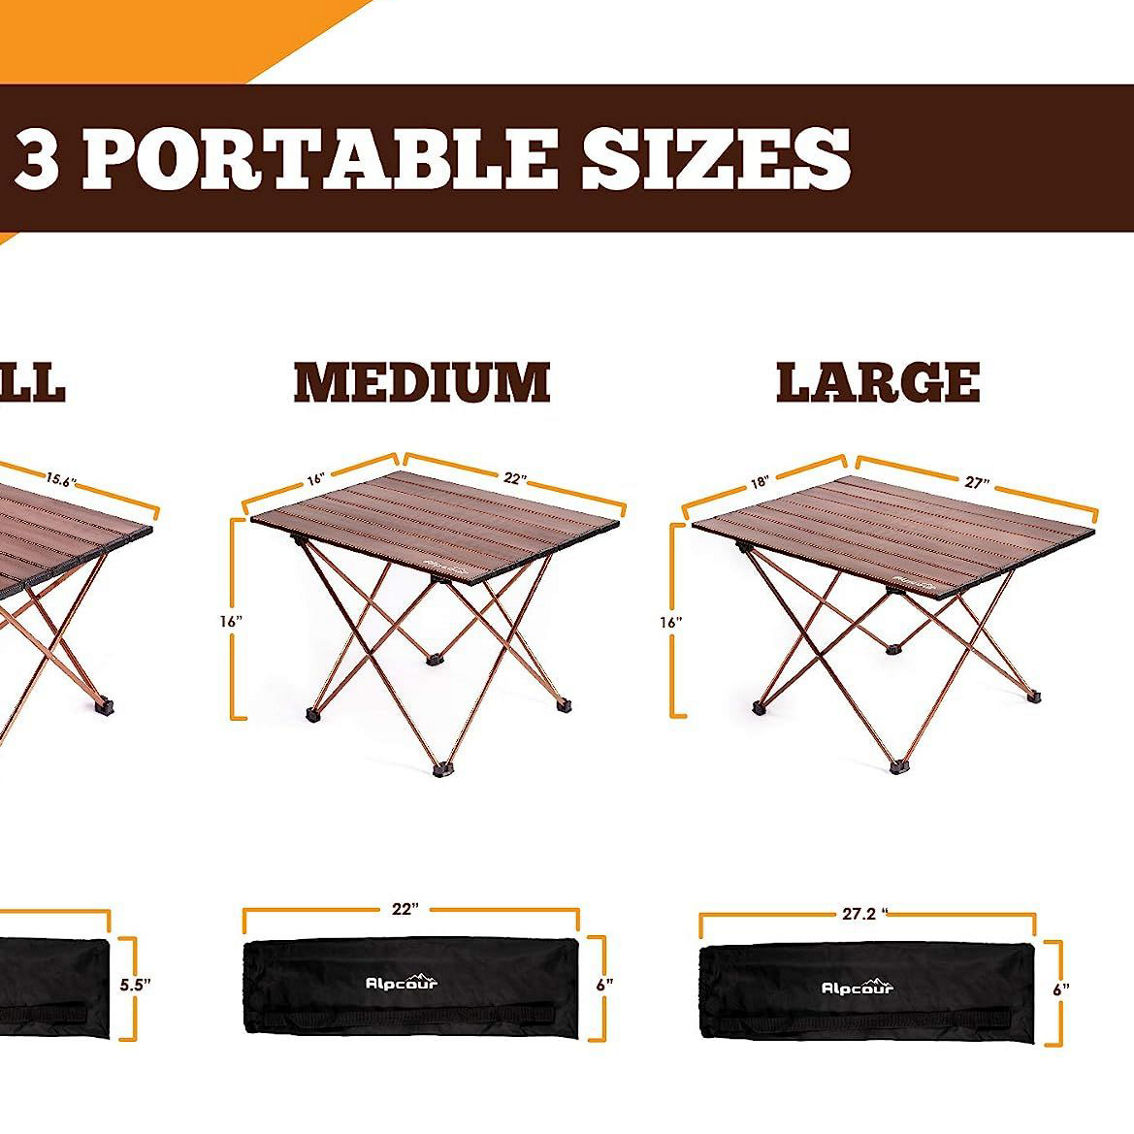 Collapsible Camping Table - Small - Image 3 of 5